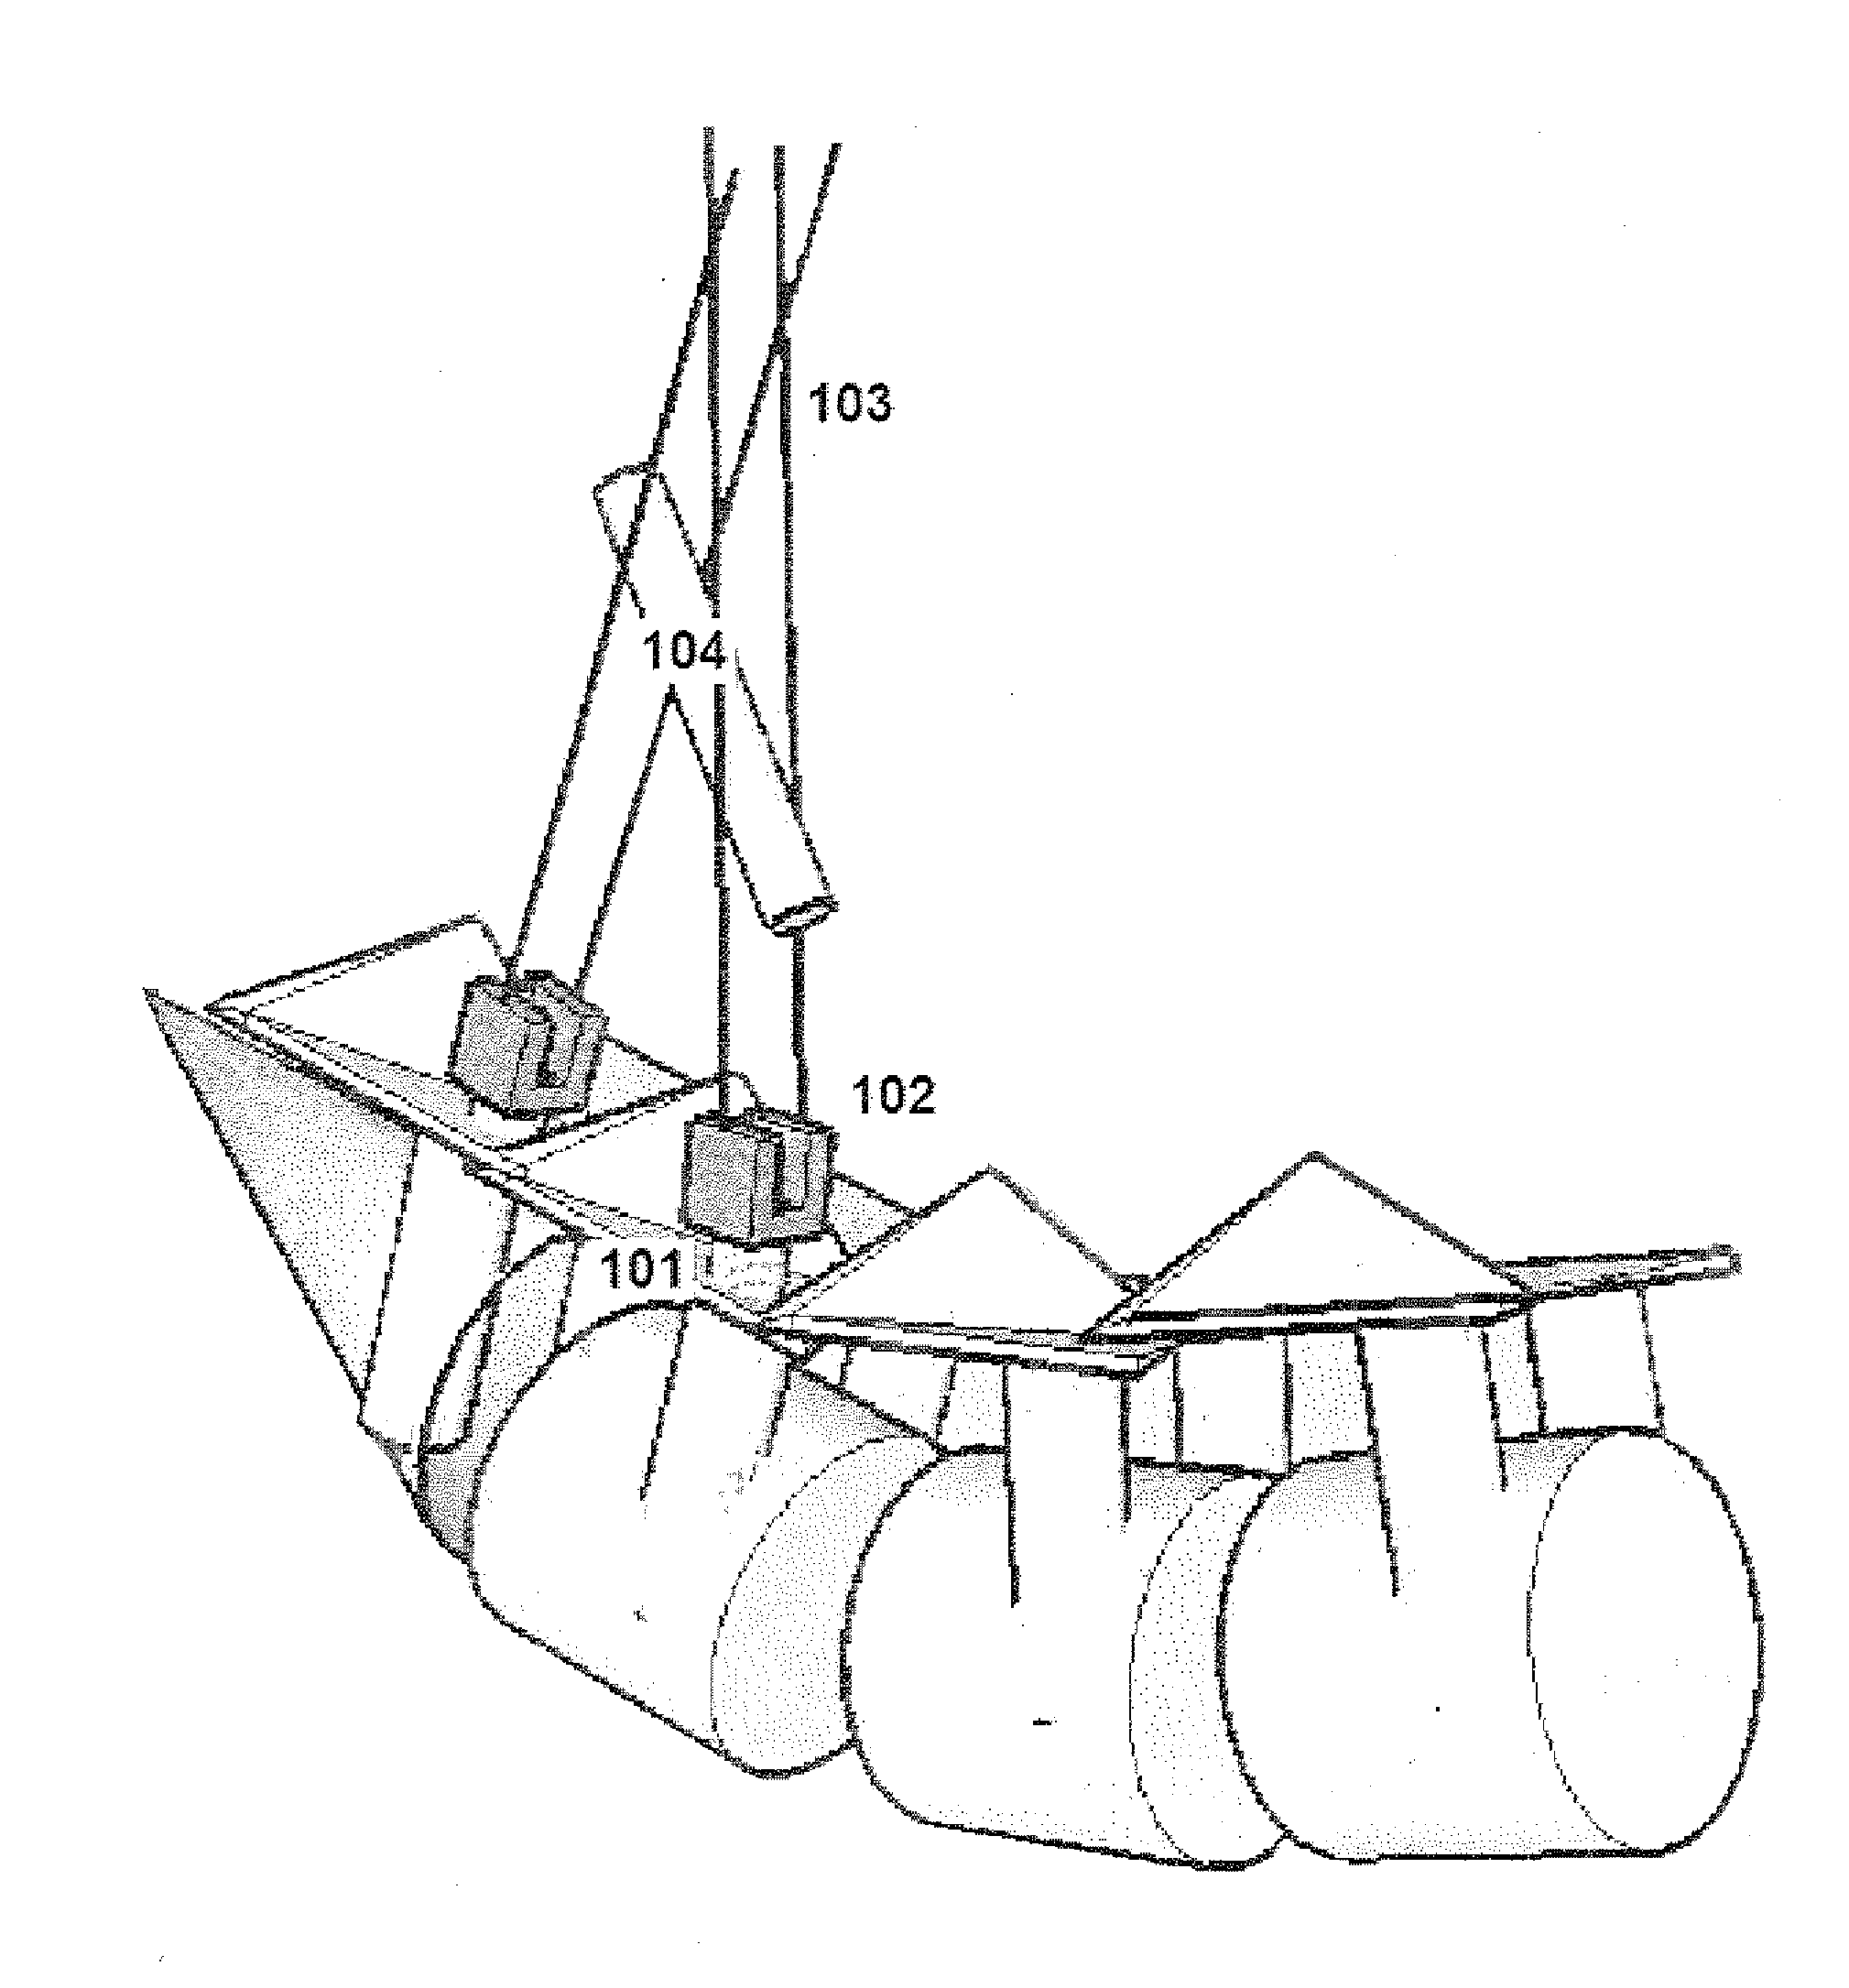 System and method for wire-guided pedicle screw stabilization of spinal vertebrae